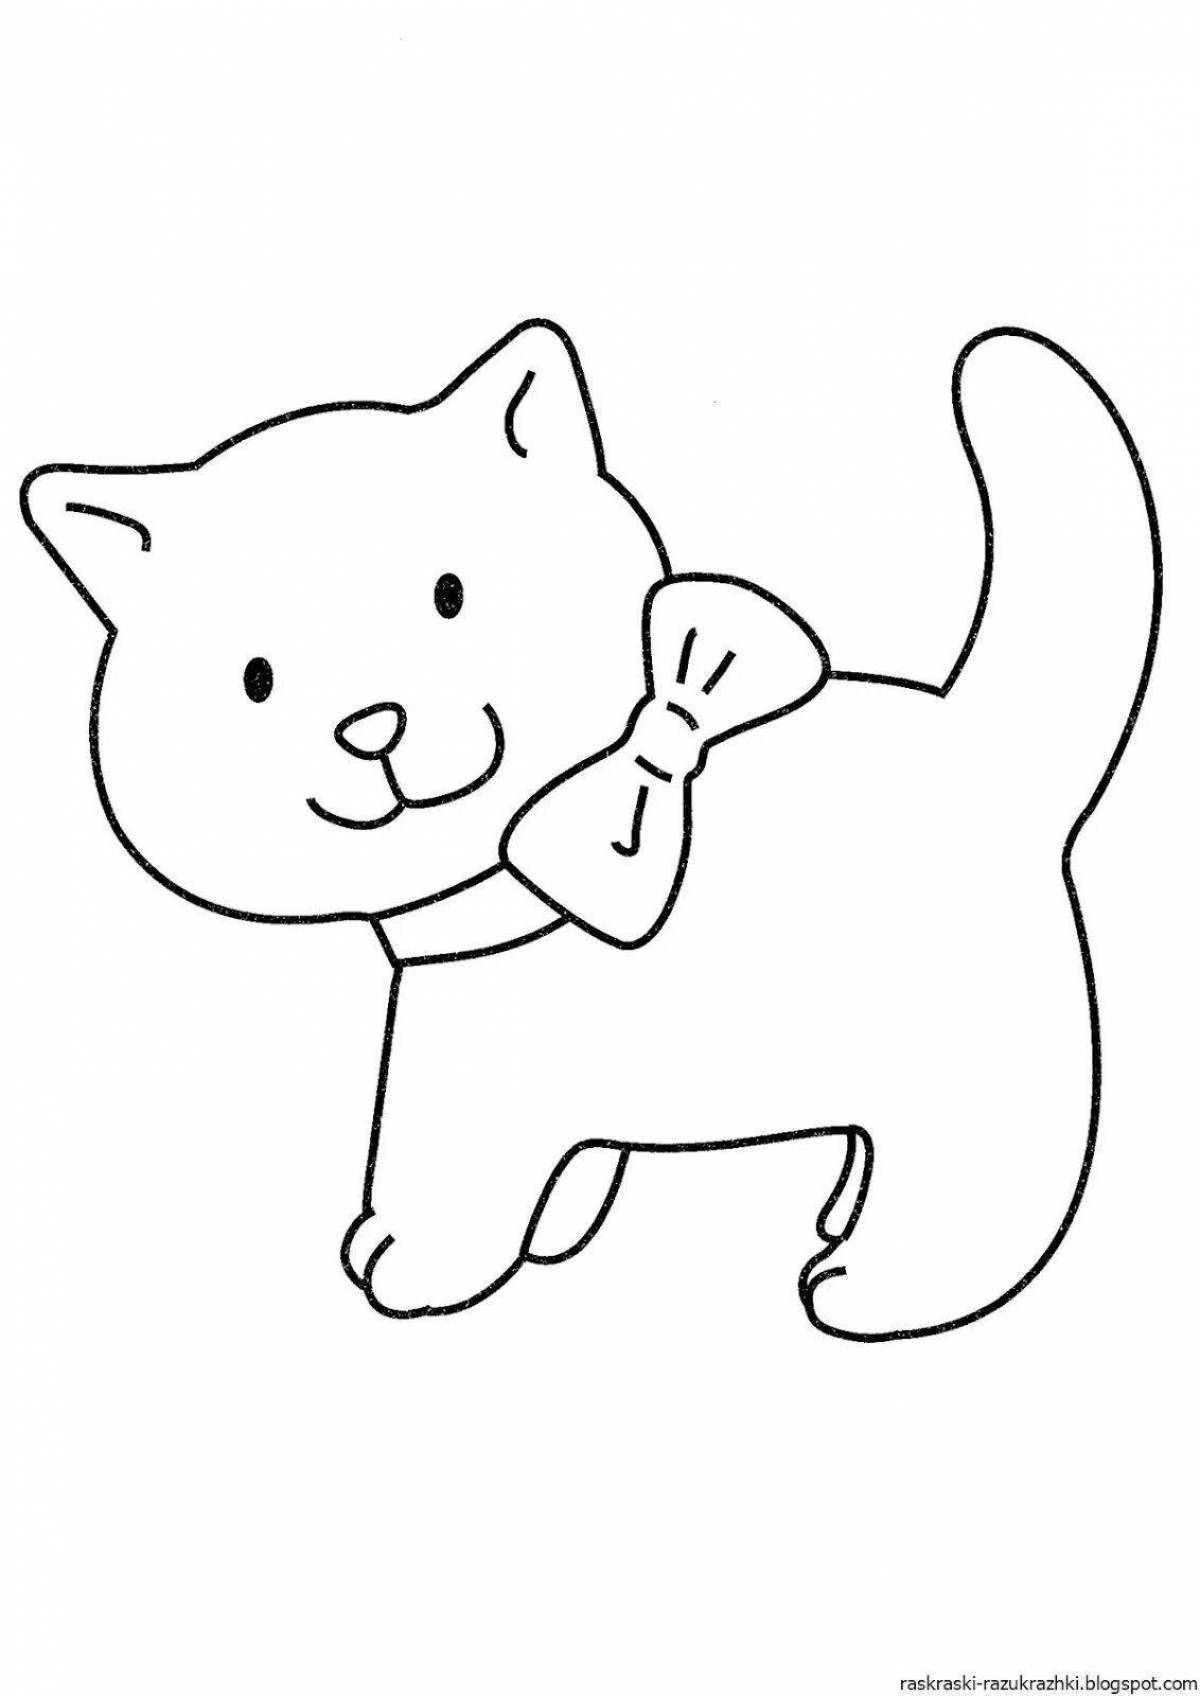 Innovative kitten coloring page for 2-3 year olds